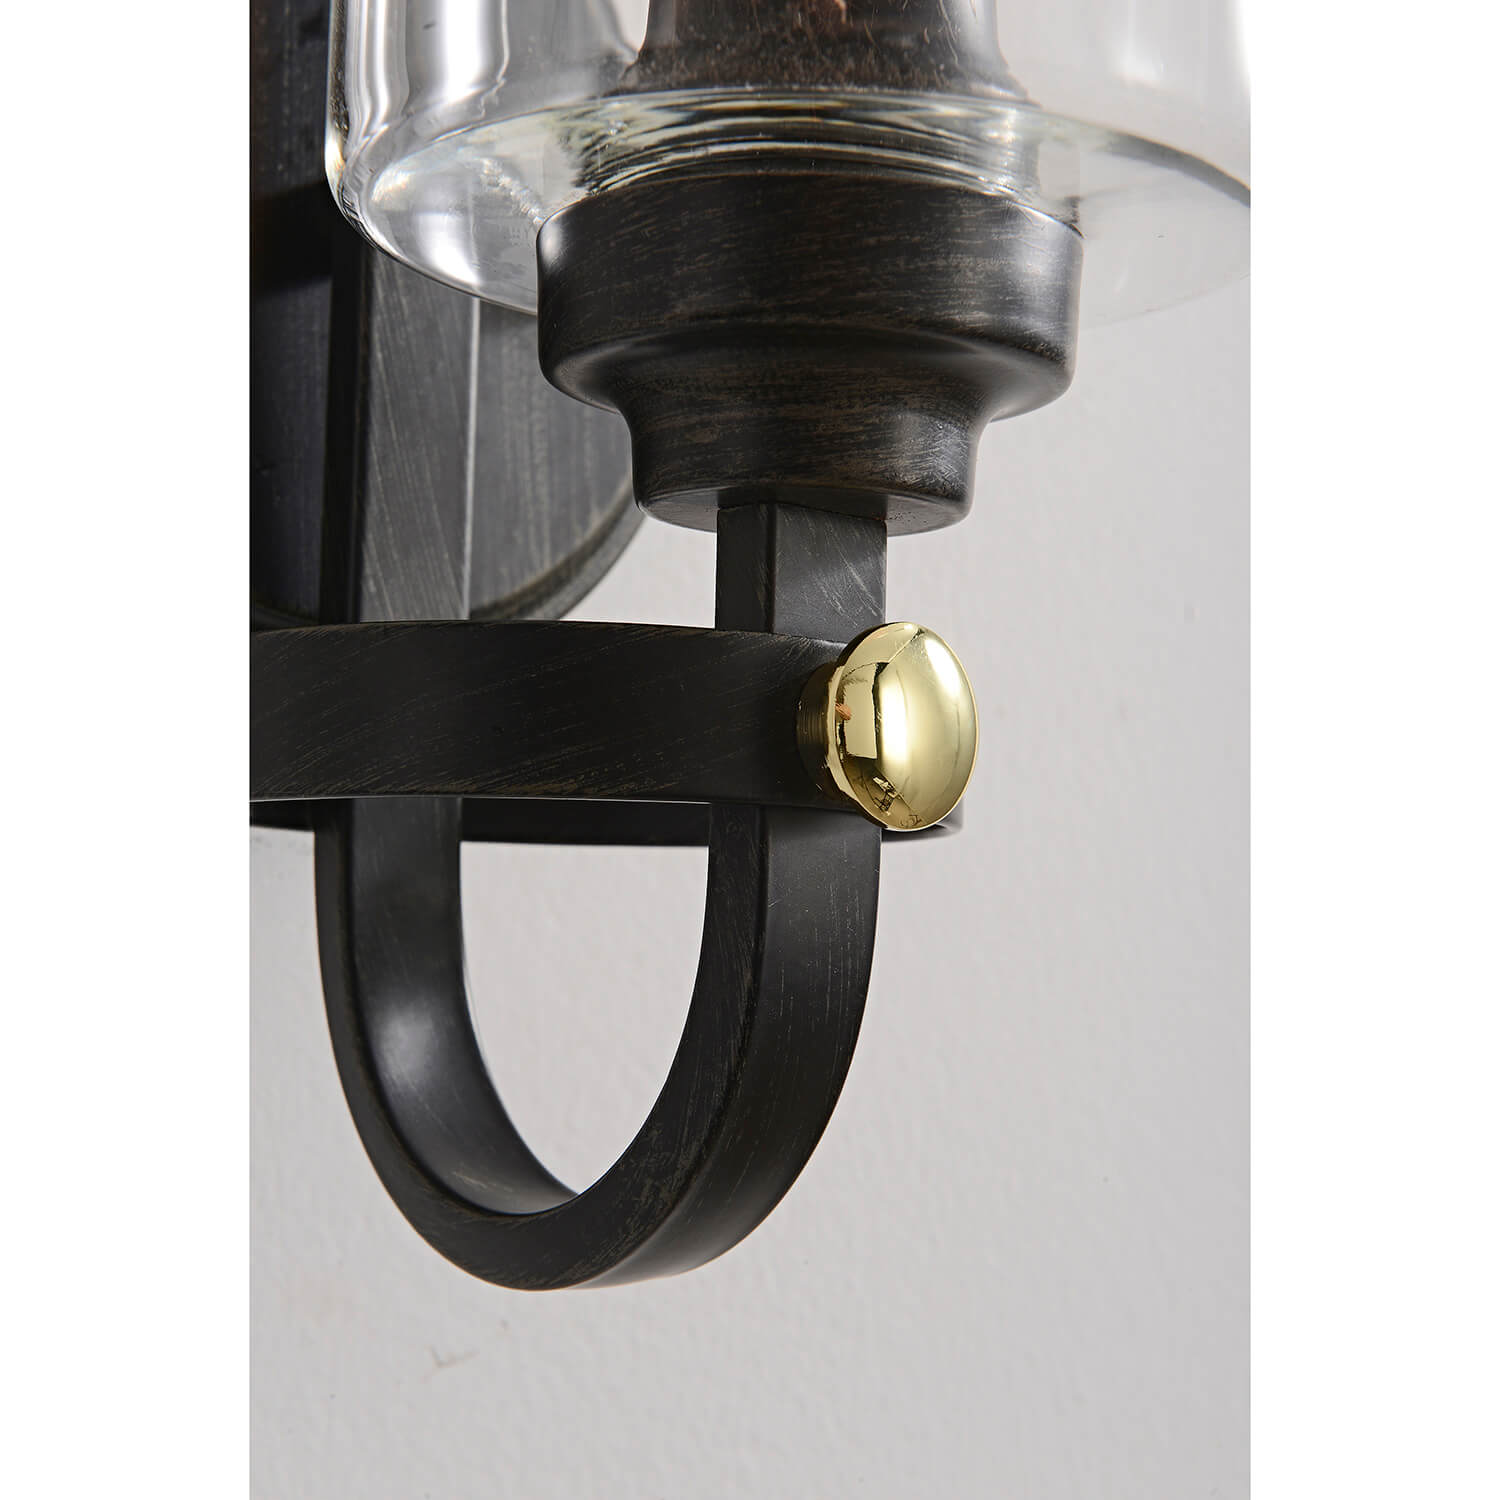 Alfreda 1 Light Antique Black and Gold Finish Glass Shade Wall Sconce LJ-9765-UCK